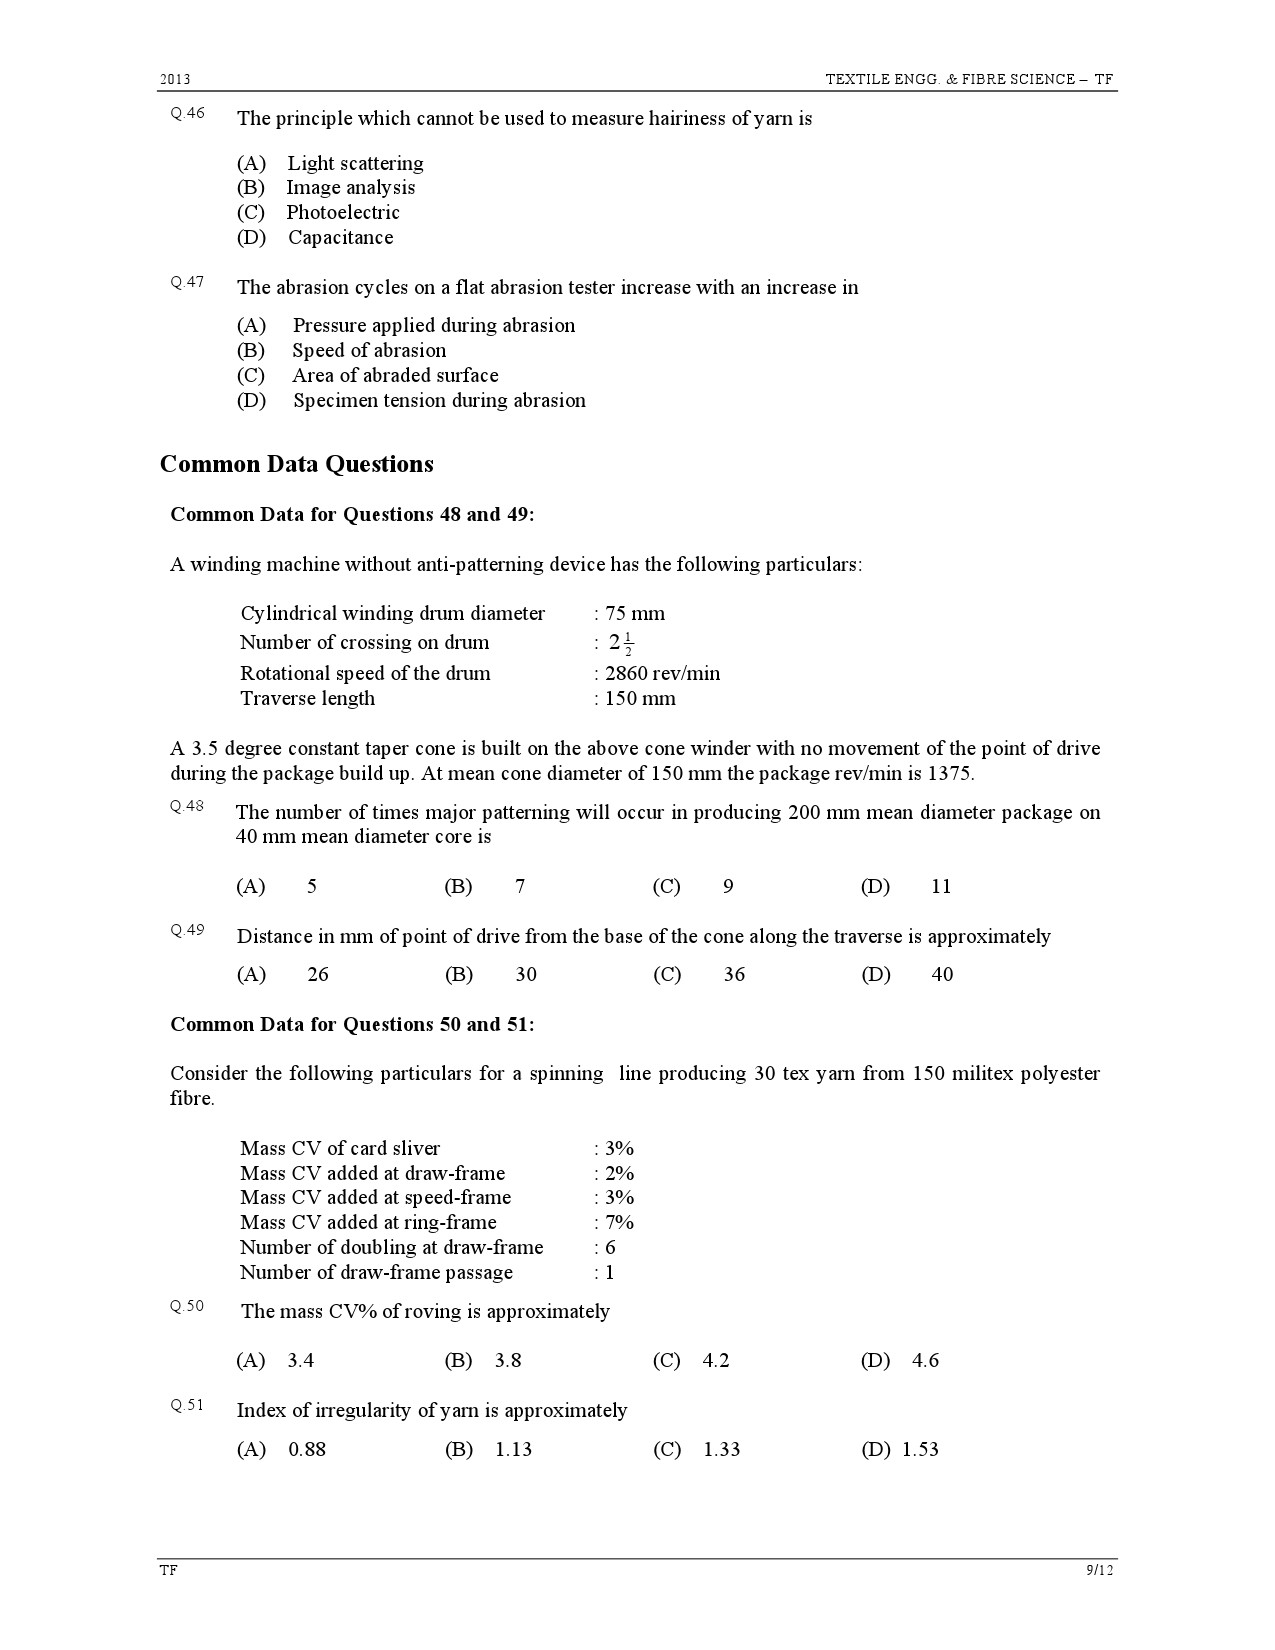 GATE Exam Question Paper 2013 Textile Engineering and Fibre Science 9